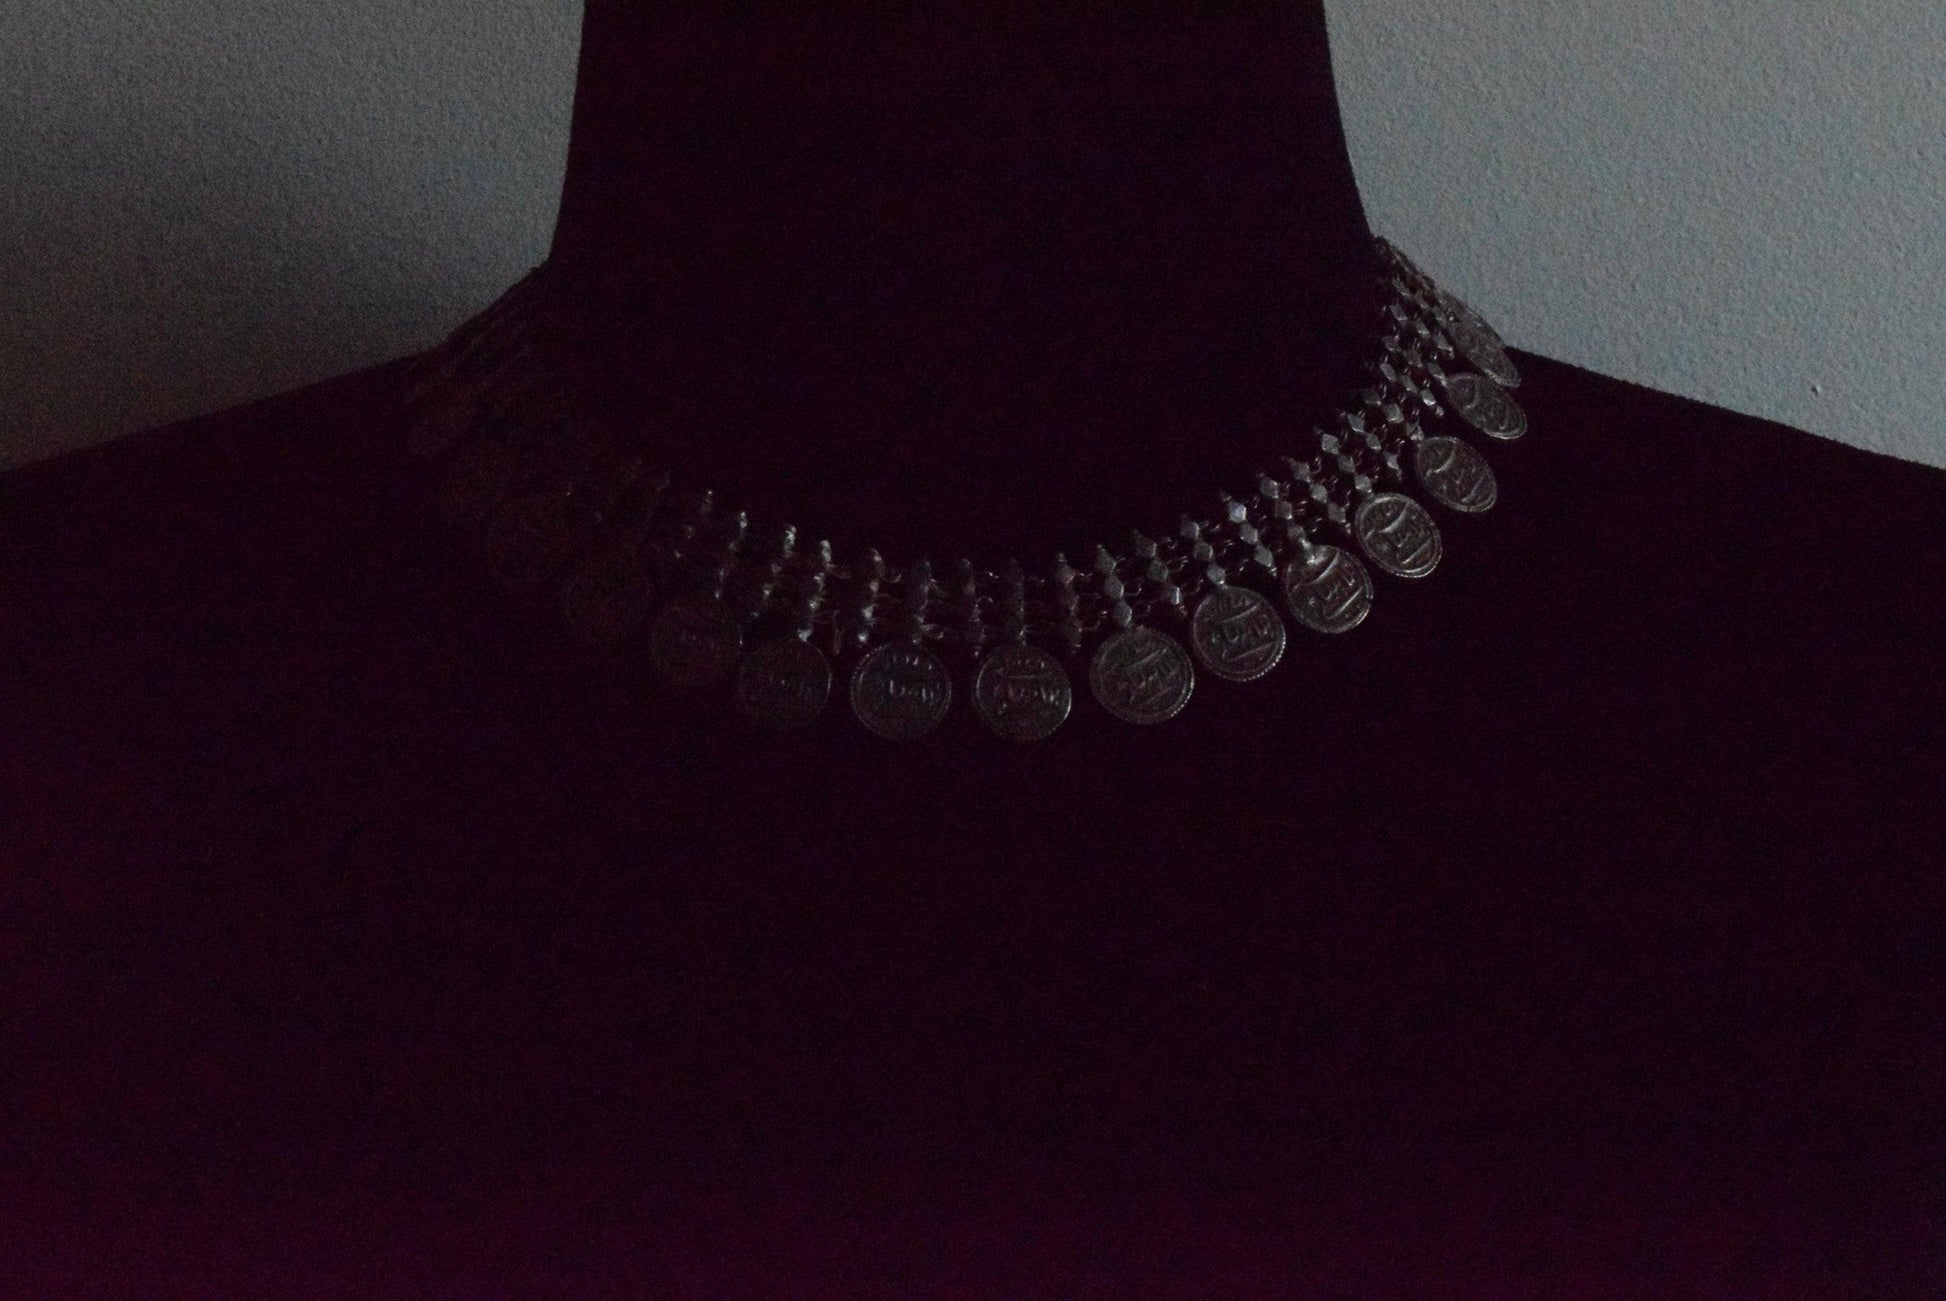 Old Silver Coin Indian Choker Necklace - Anteeka